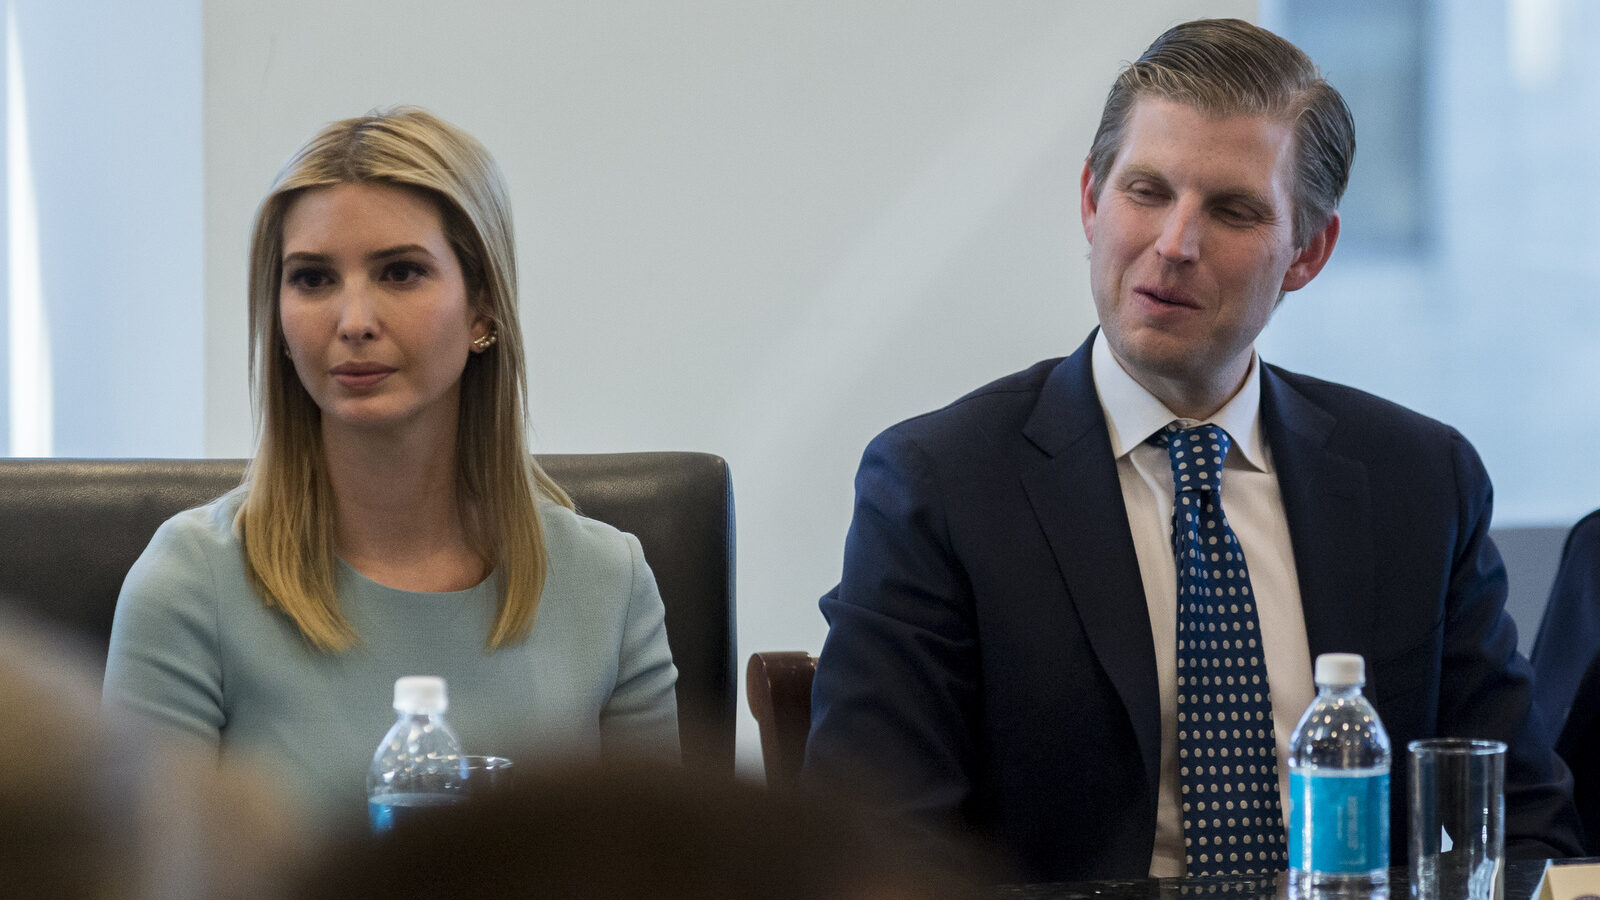 Ivanka and Eric Trump are seen at a meeting of technology leaders in the Trump Organization conference room at Trump Tower in New York, NY, USA on December 14, 2016. Credit: Albin Lohr-Jones / Pool via CNP /MediaPunch/IPX